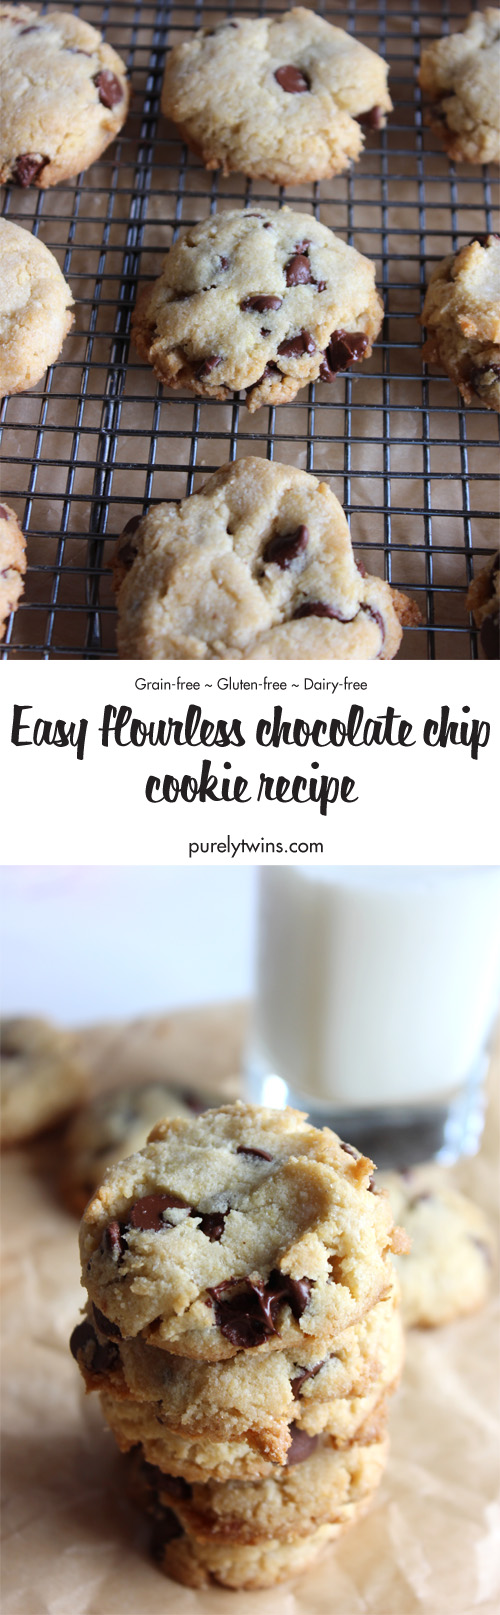 Easy flourless chocolate chip cookies. Made with almond flour and coconut flour. This chocolate chip cookie recipe is gluten-free, grain-free, and dairy-free. These cookies are made from 8 ingredients and easy to make. Paleo friendly almond flour chocolate chip cookie recipe. An all-time favorite cookie recipe. 